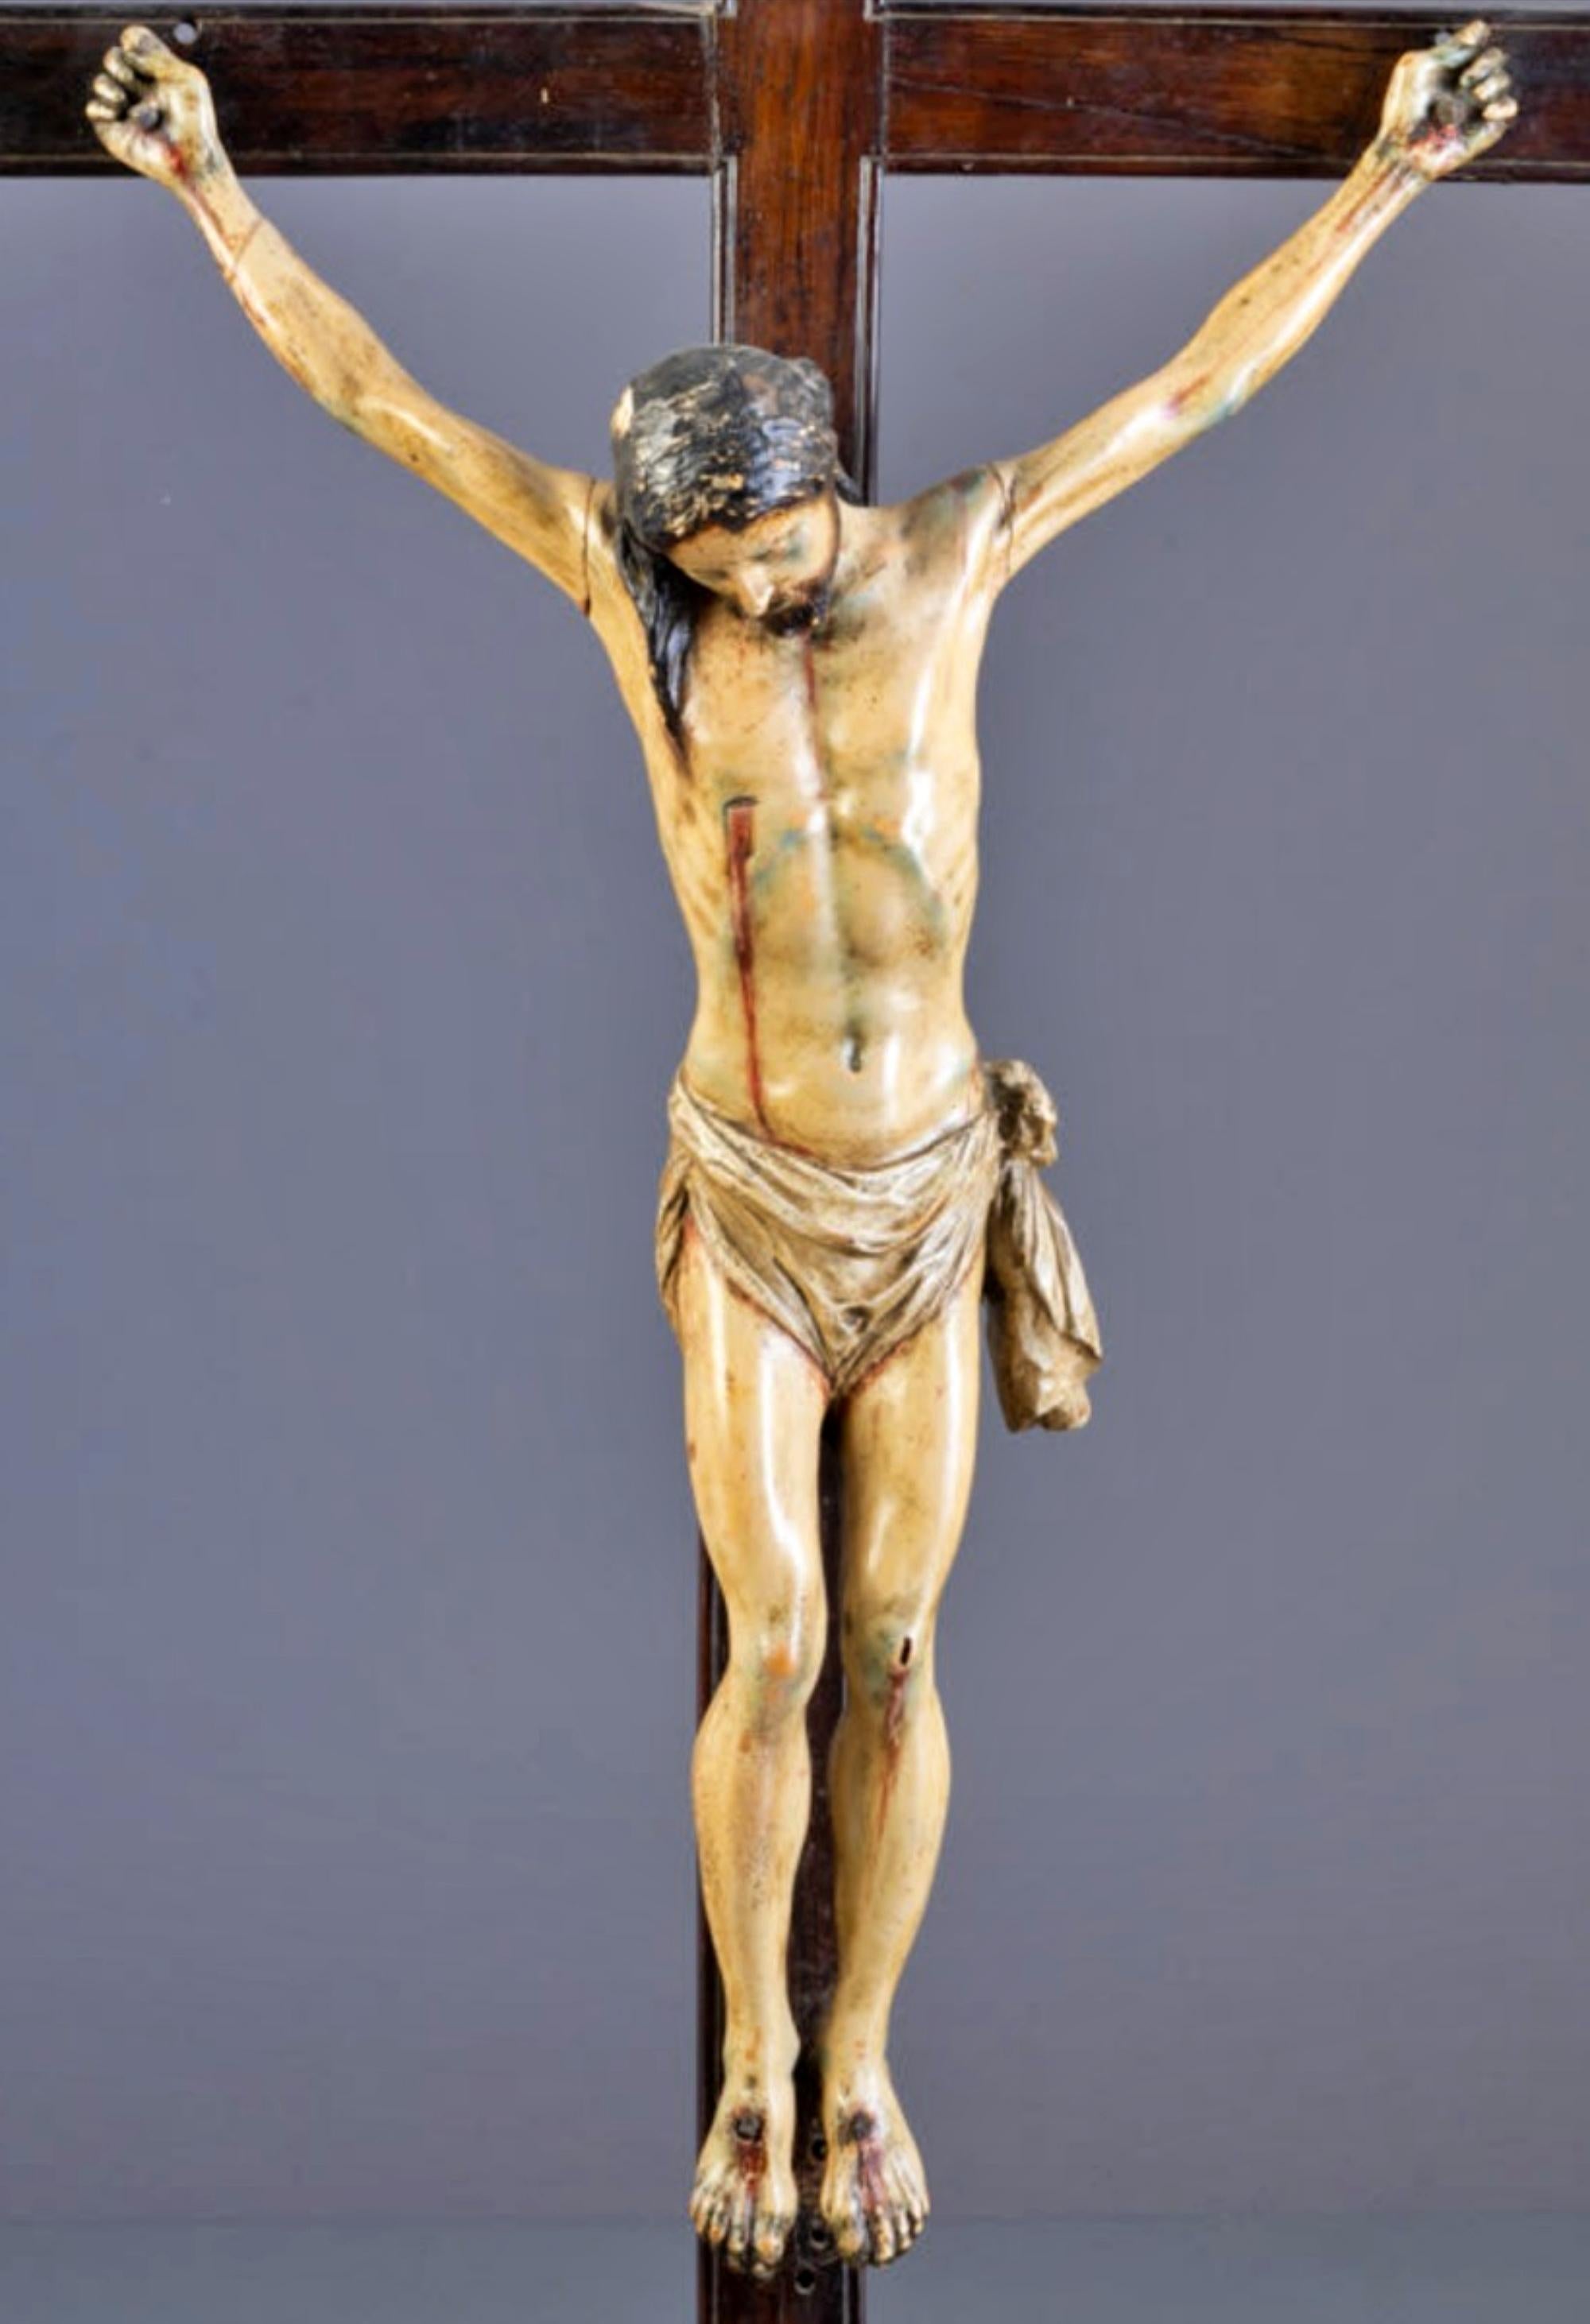 Hand-Crafted Christ Sculpture in Polychrome Wood, Italian School 17th Century